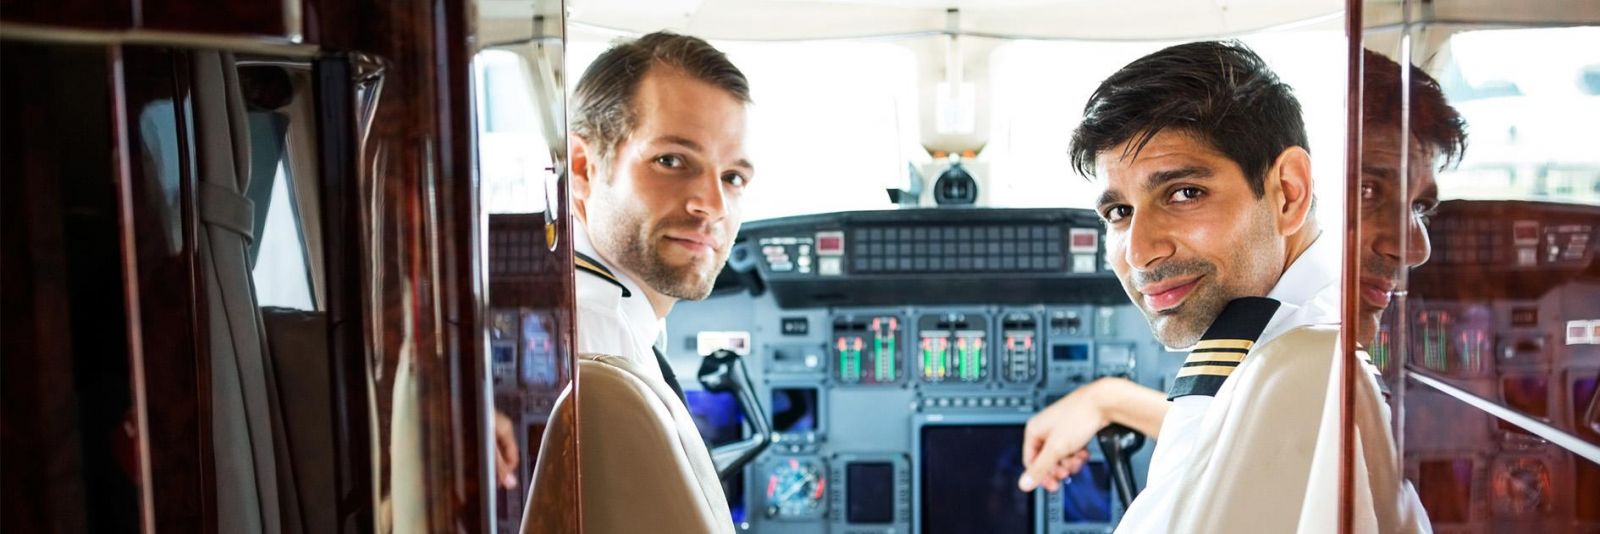 Two pilots in cockpit